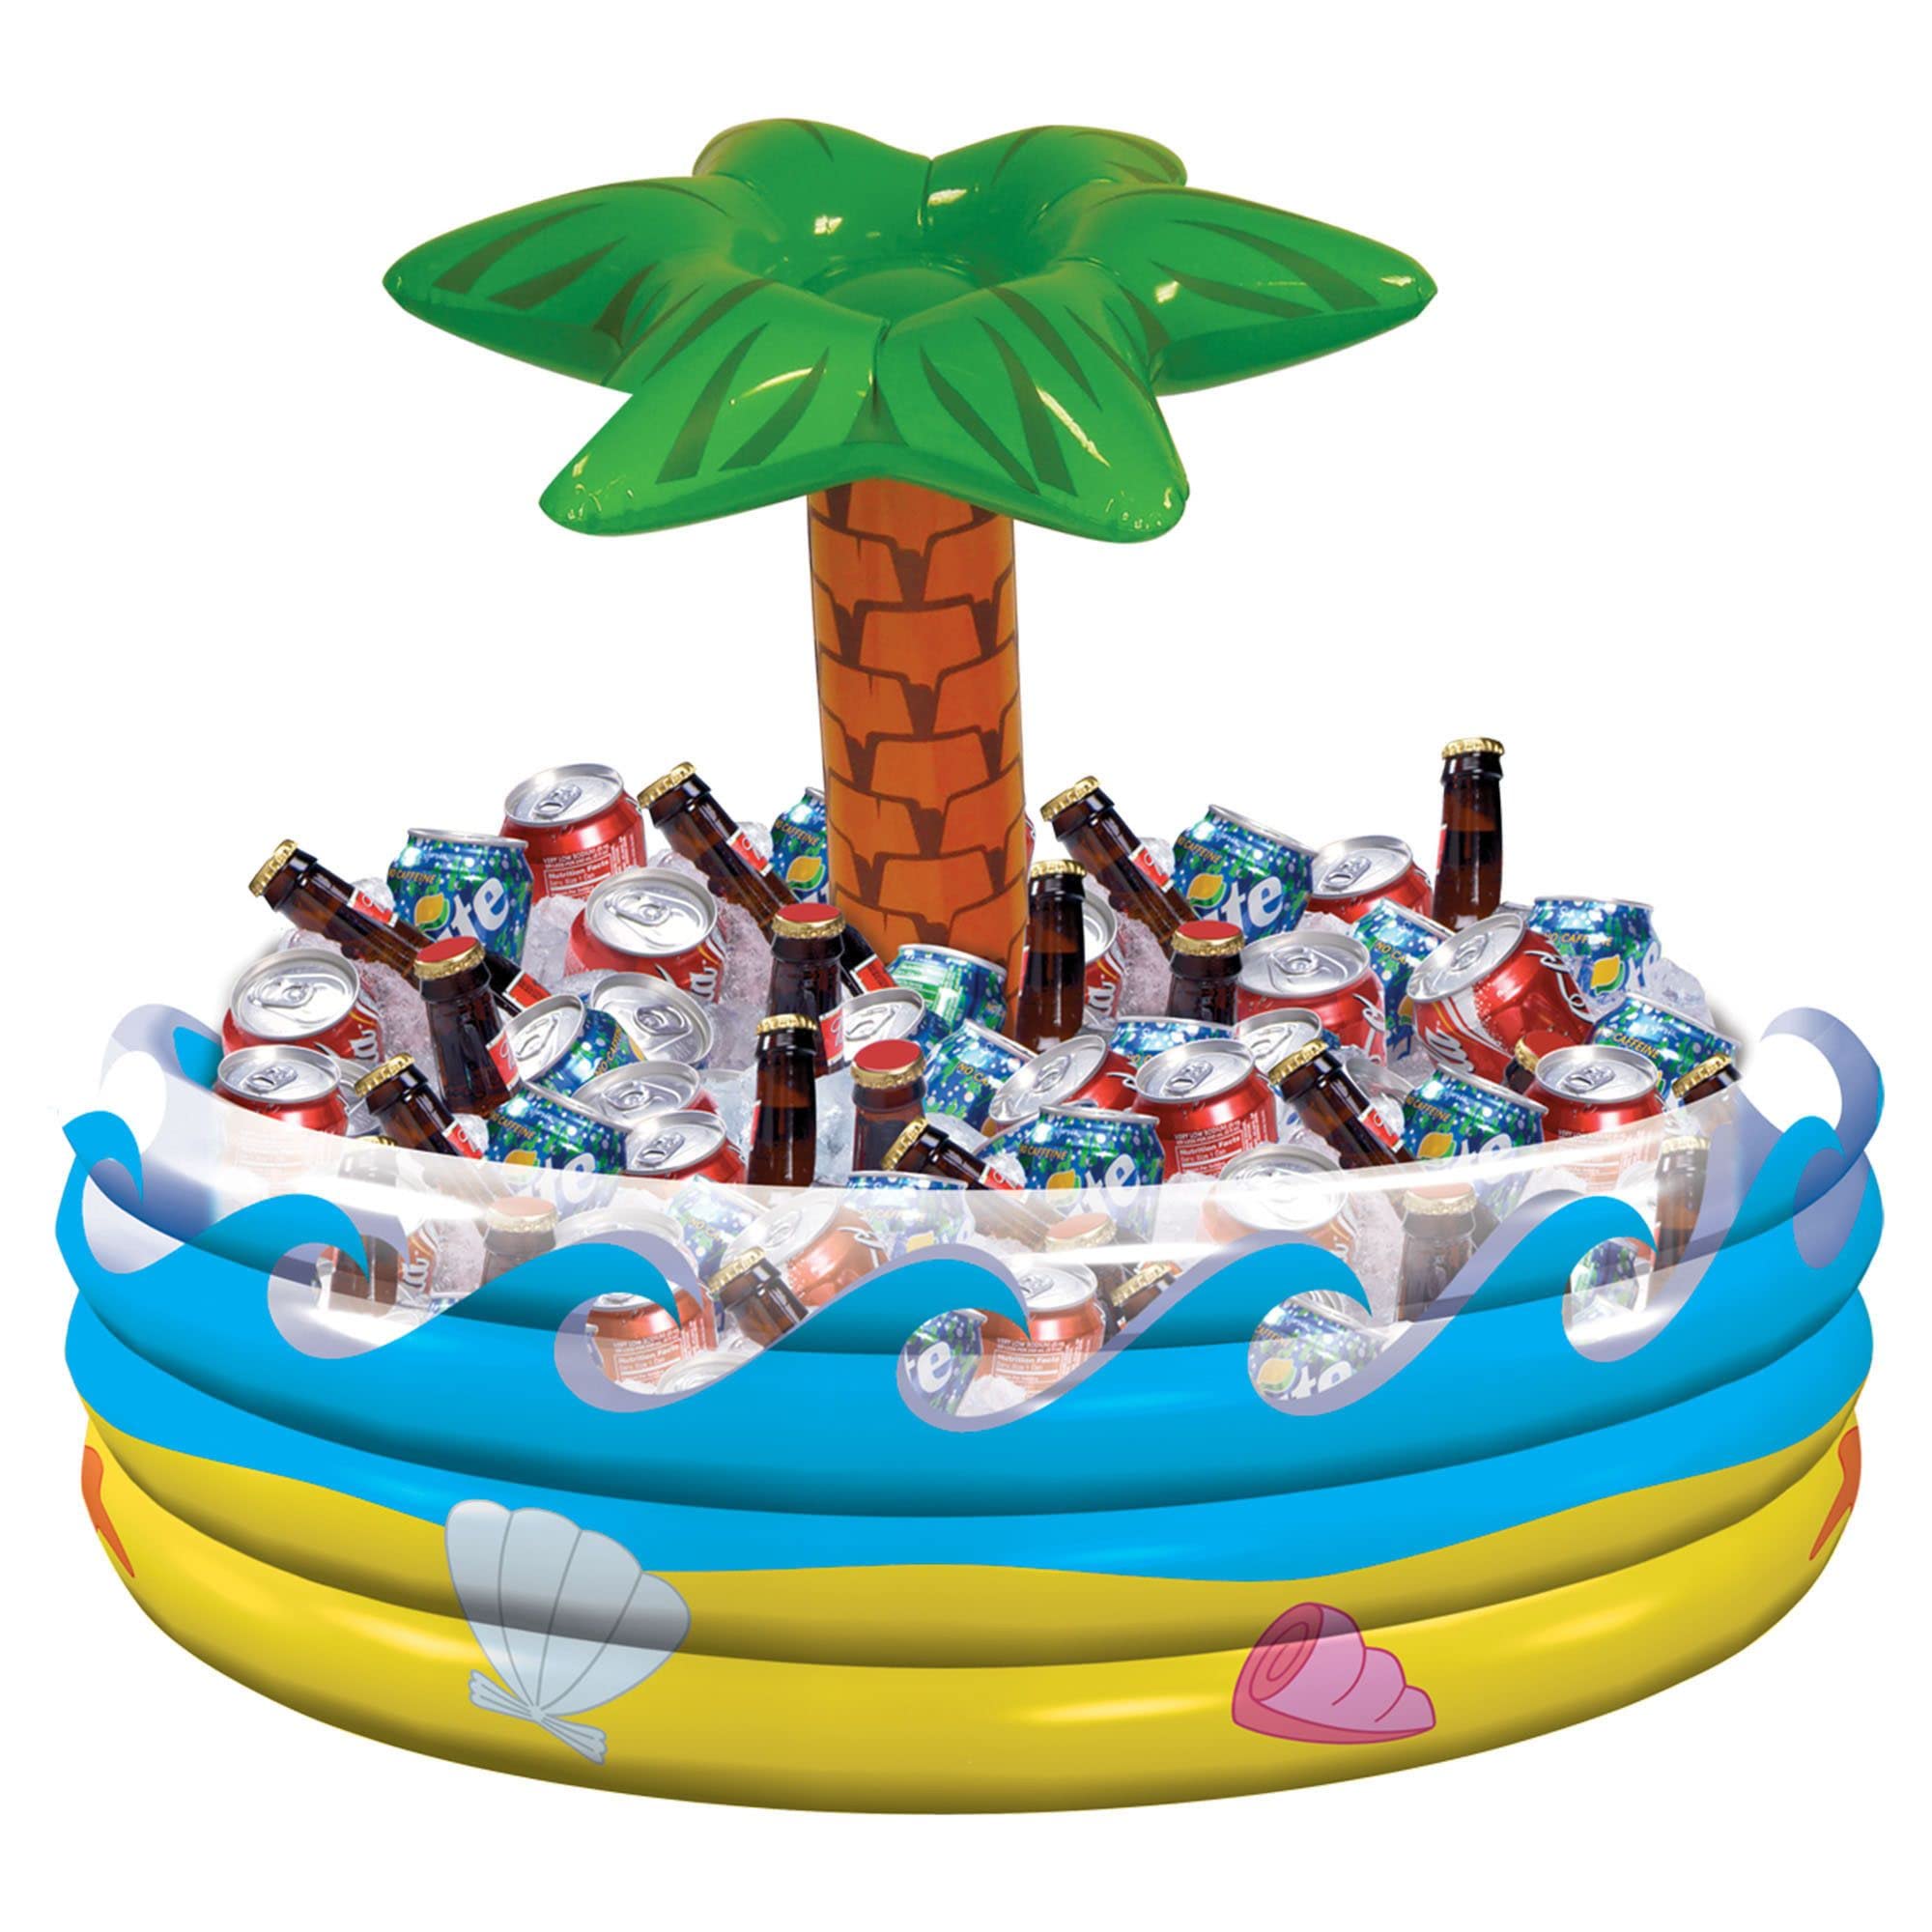 Amscan Tropical Palm Tree Inflatable Cooler, 14' x 29 1/2', Multicolor, 1 Pc